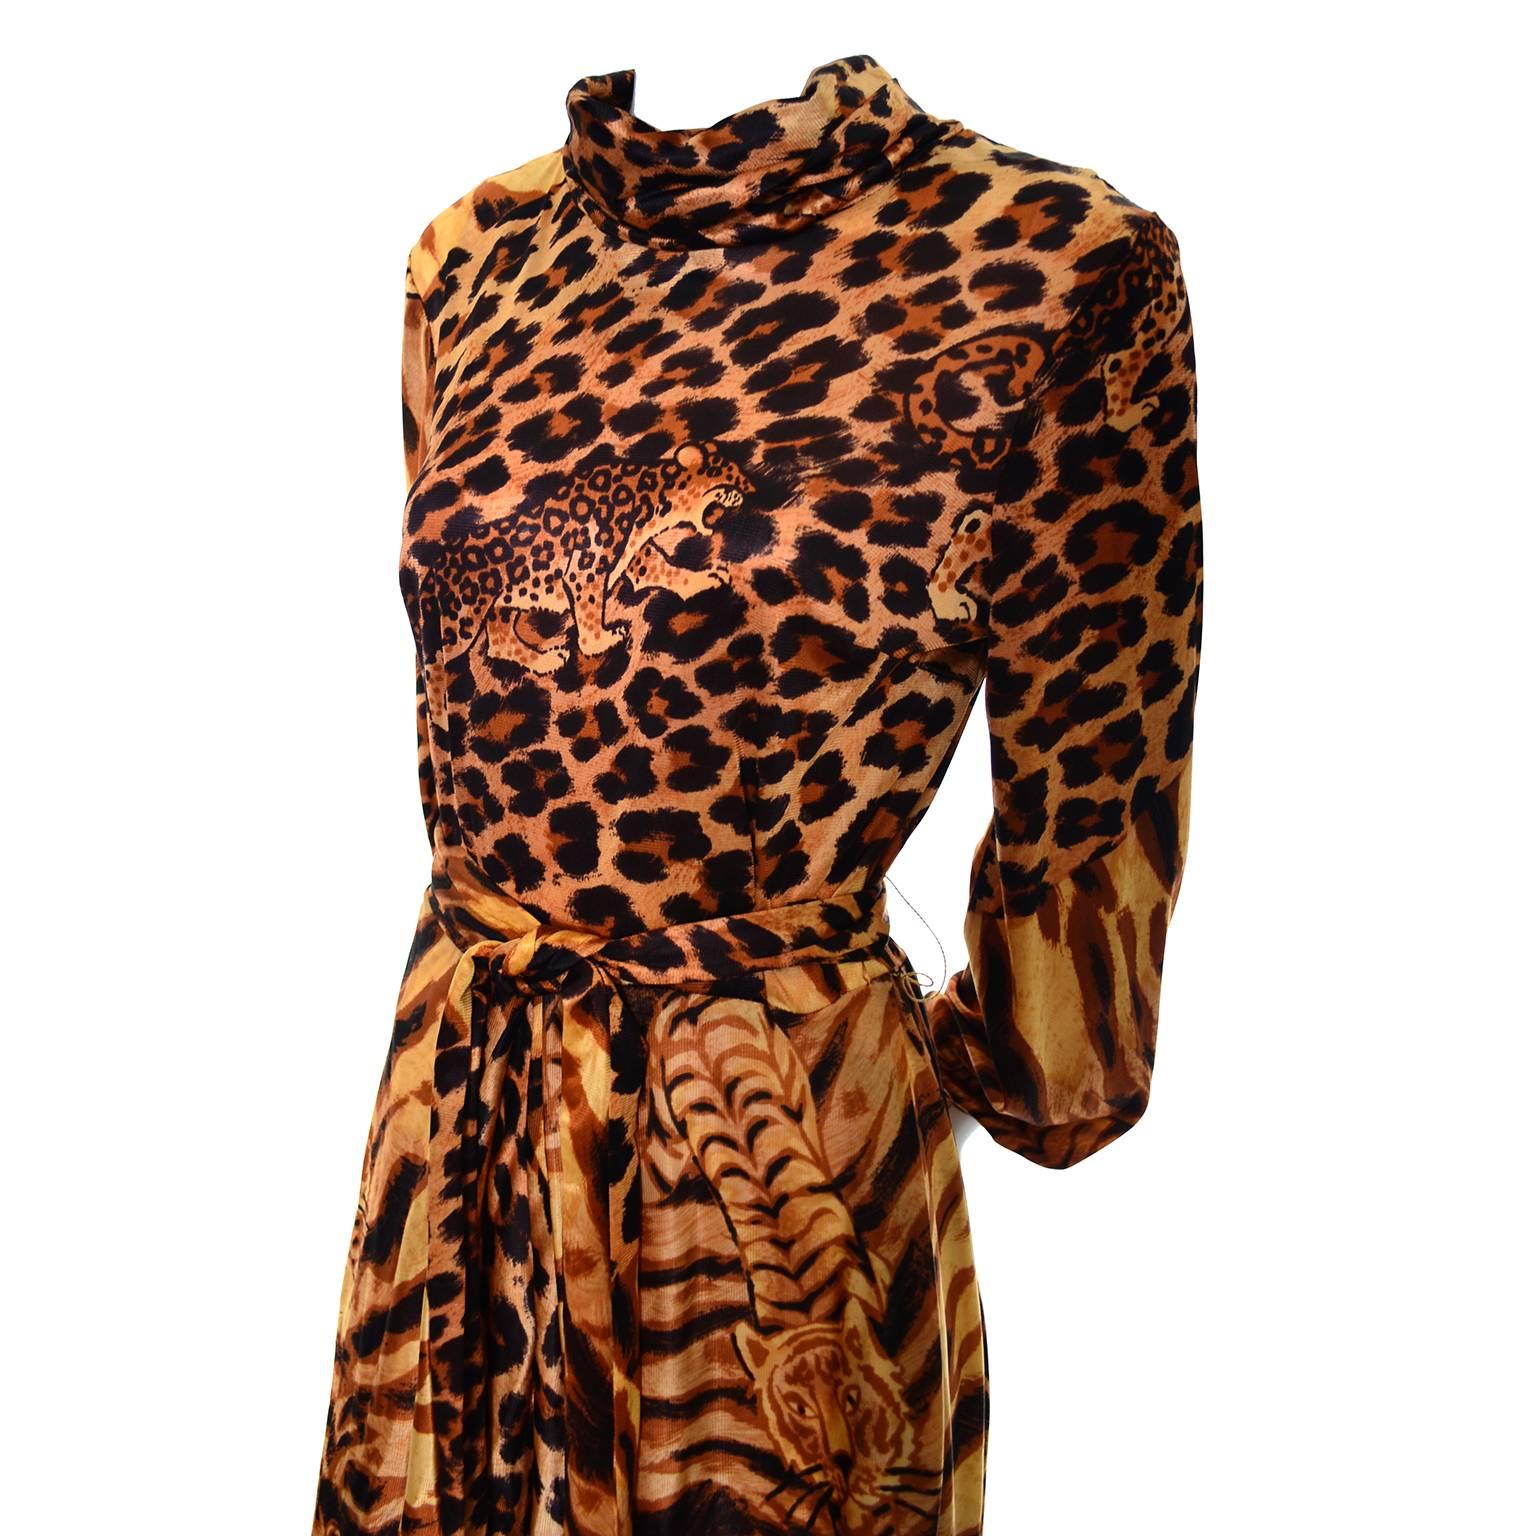 Women's 1970s Vintage Jumpsuit in Leopard Cheetah Jersey Print with Palazzo Pants S/M